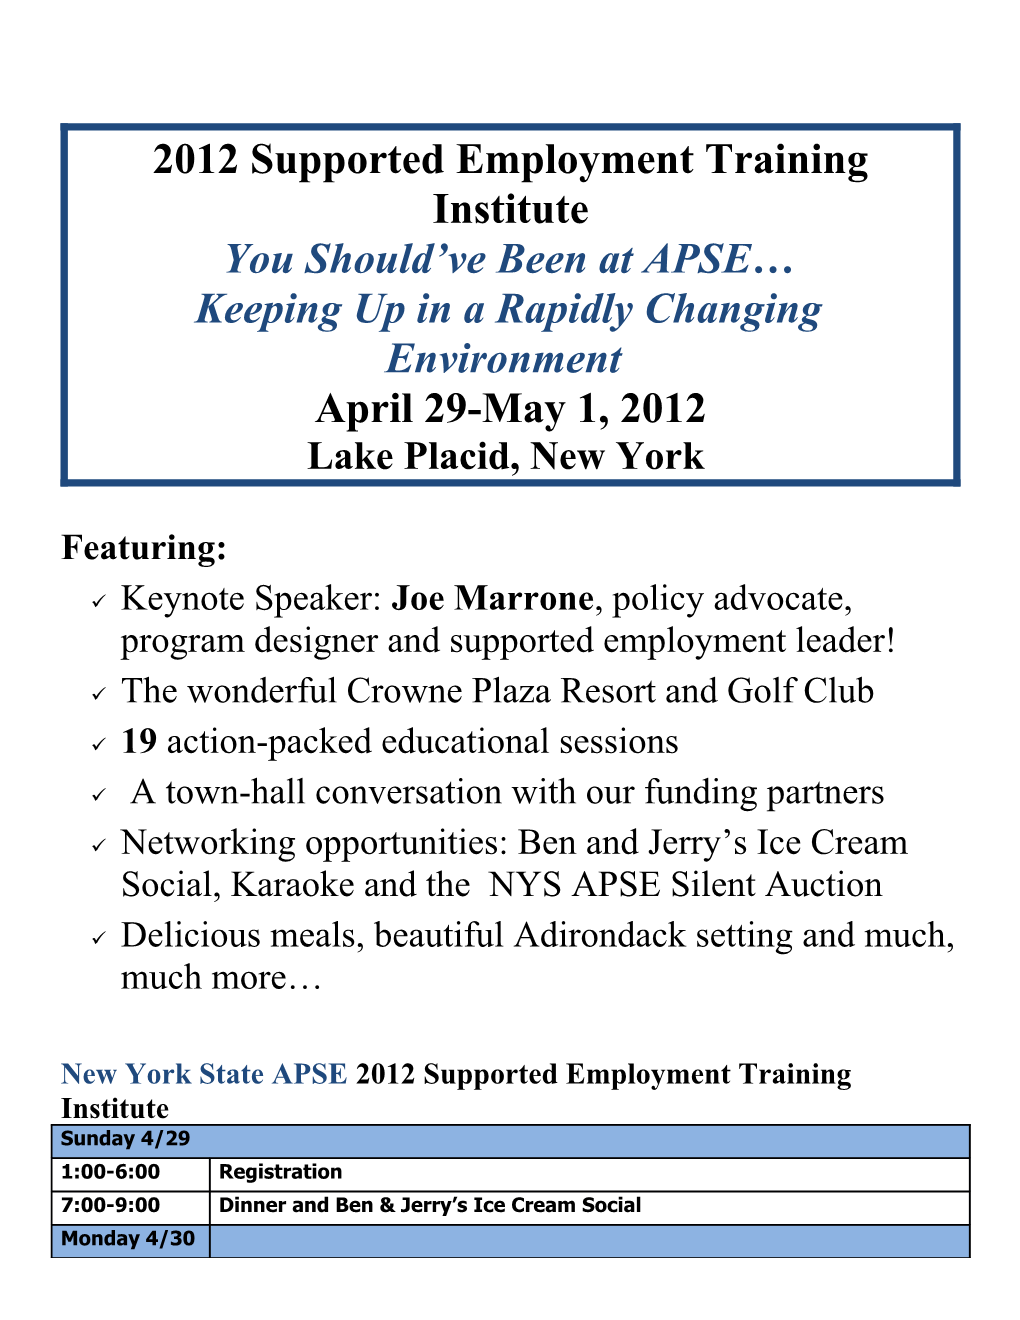 2012 Supported Employment Training Institute